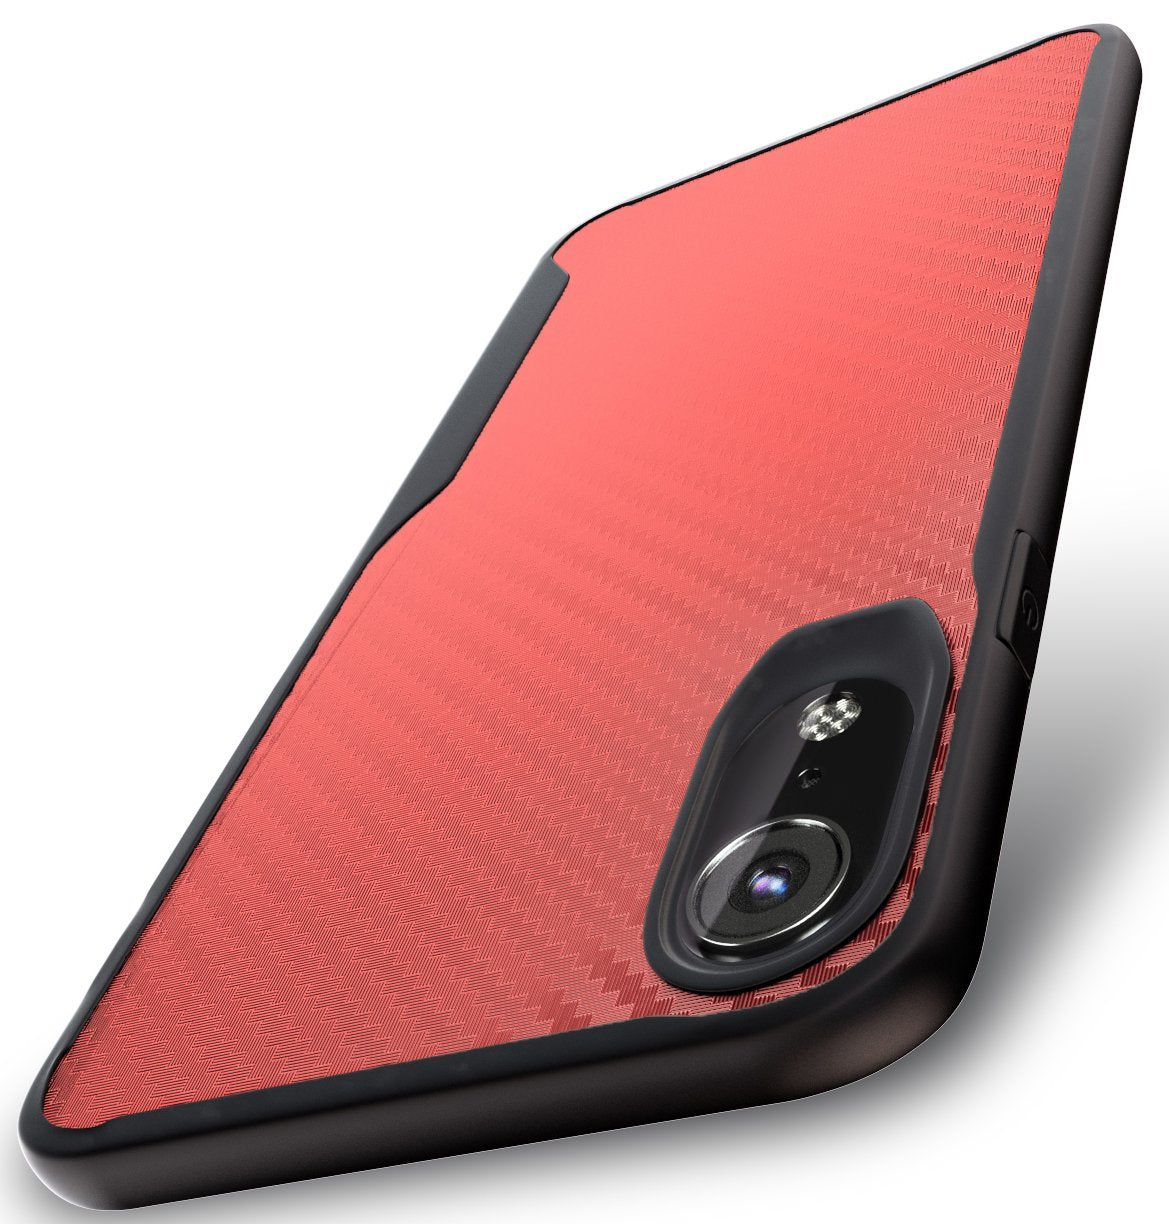 iPhone Xr Kitoo Carbon Fiber Pattern Case Red